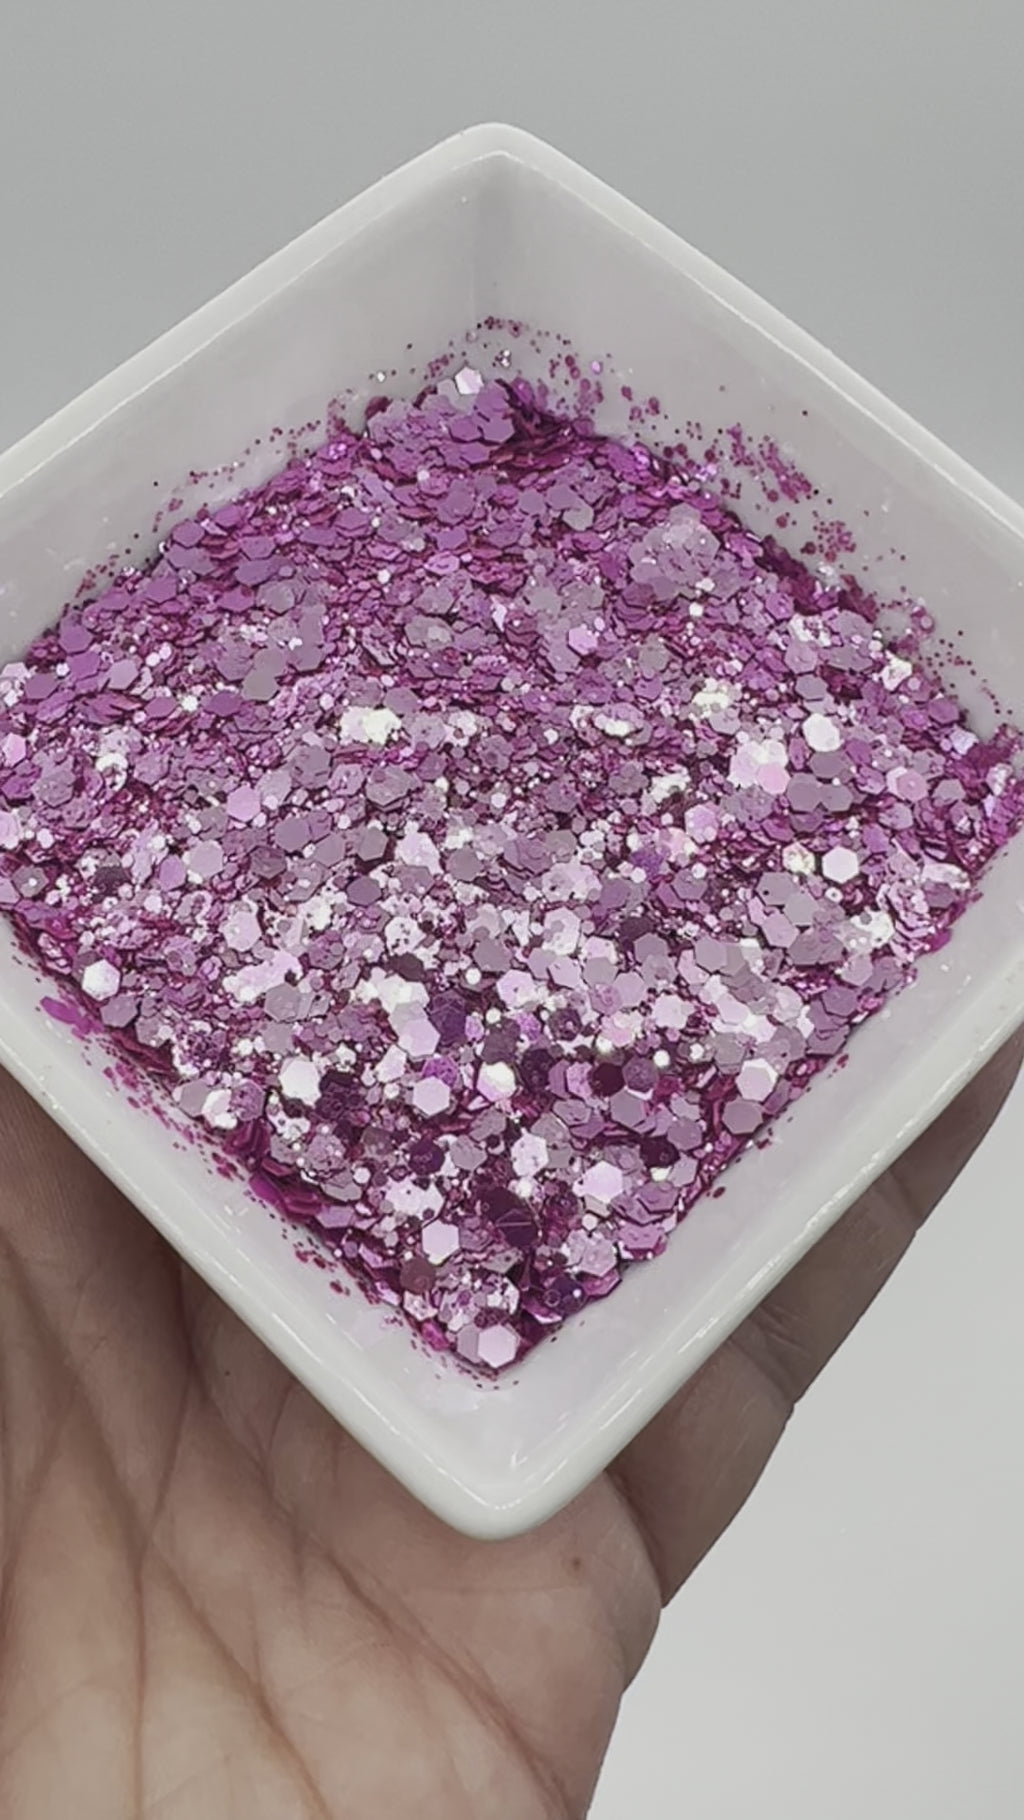 Orchid Gem is a pink chunky mix glitter